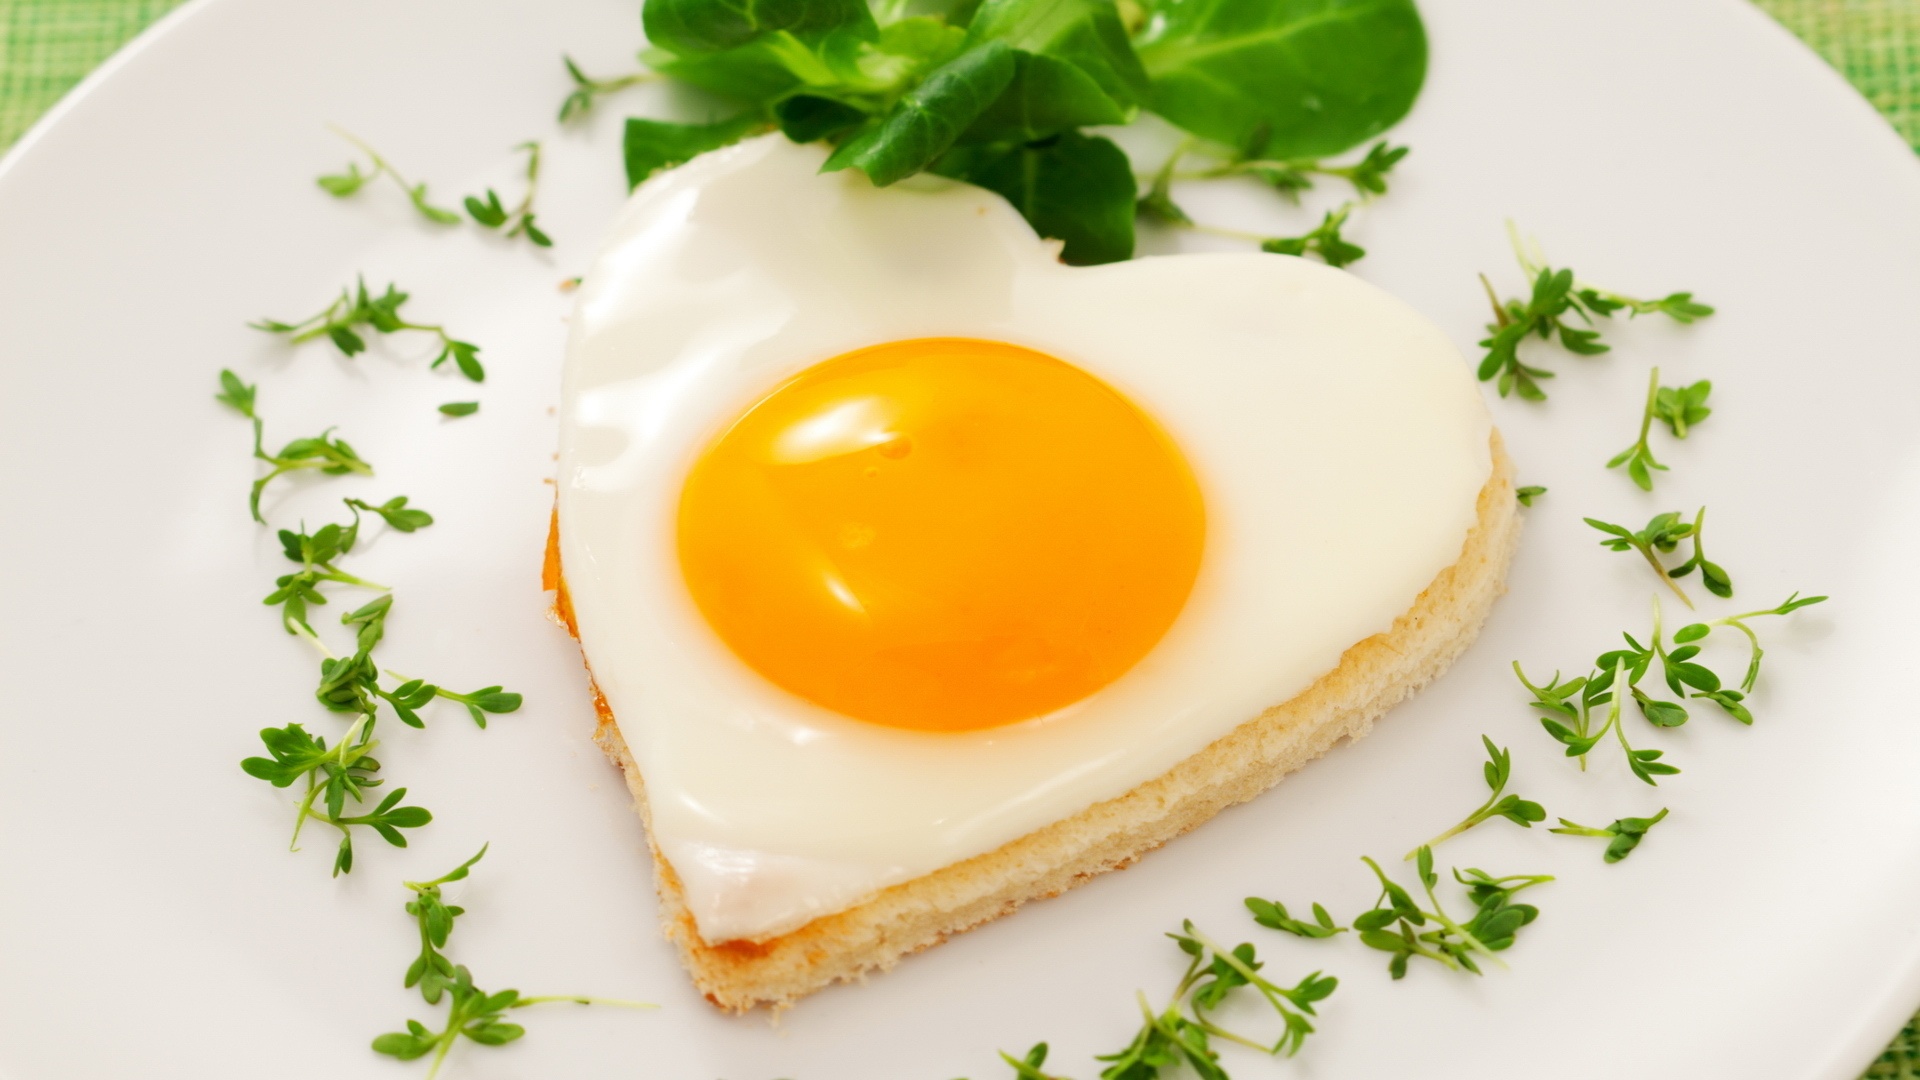 A healthy breakfast reduces heart attack risk